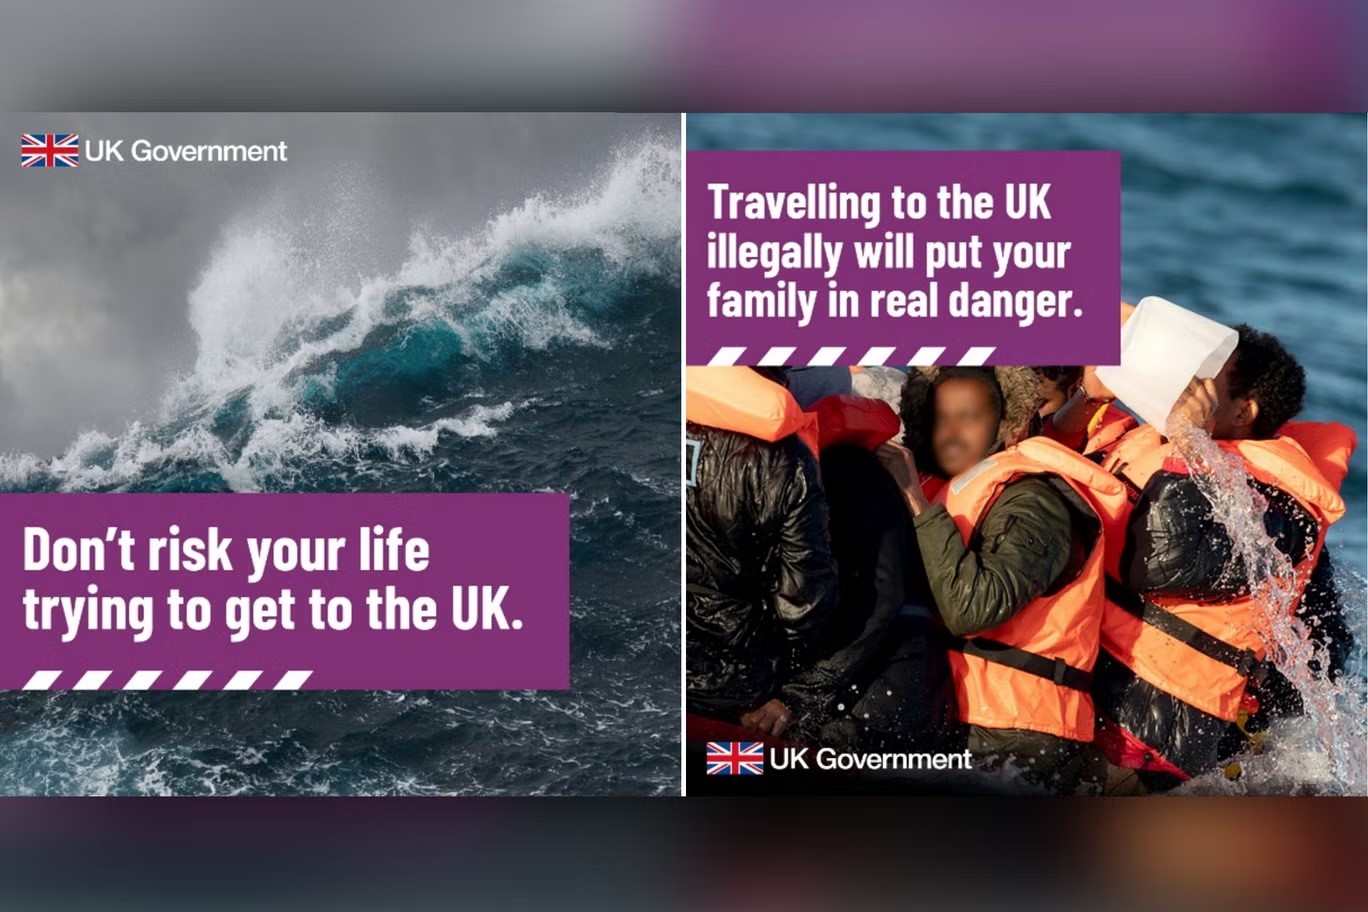 Deterrence campaign poster from UK Government saying 'don't risk your life coming to the UK' showing people drowning at sea 